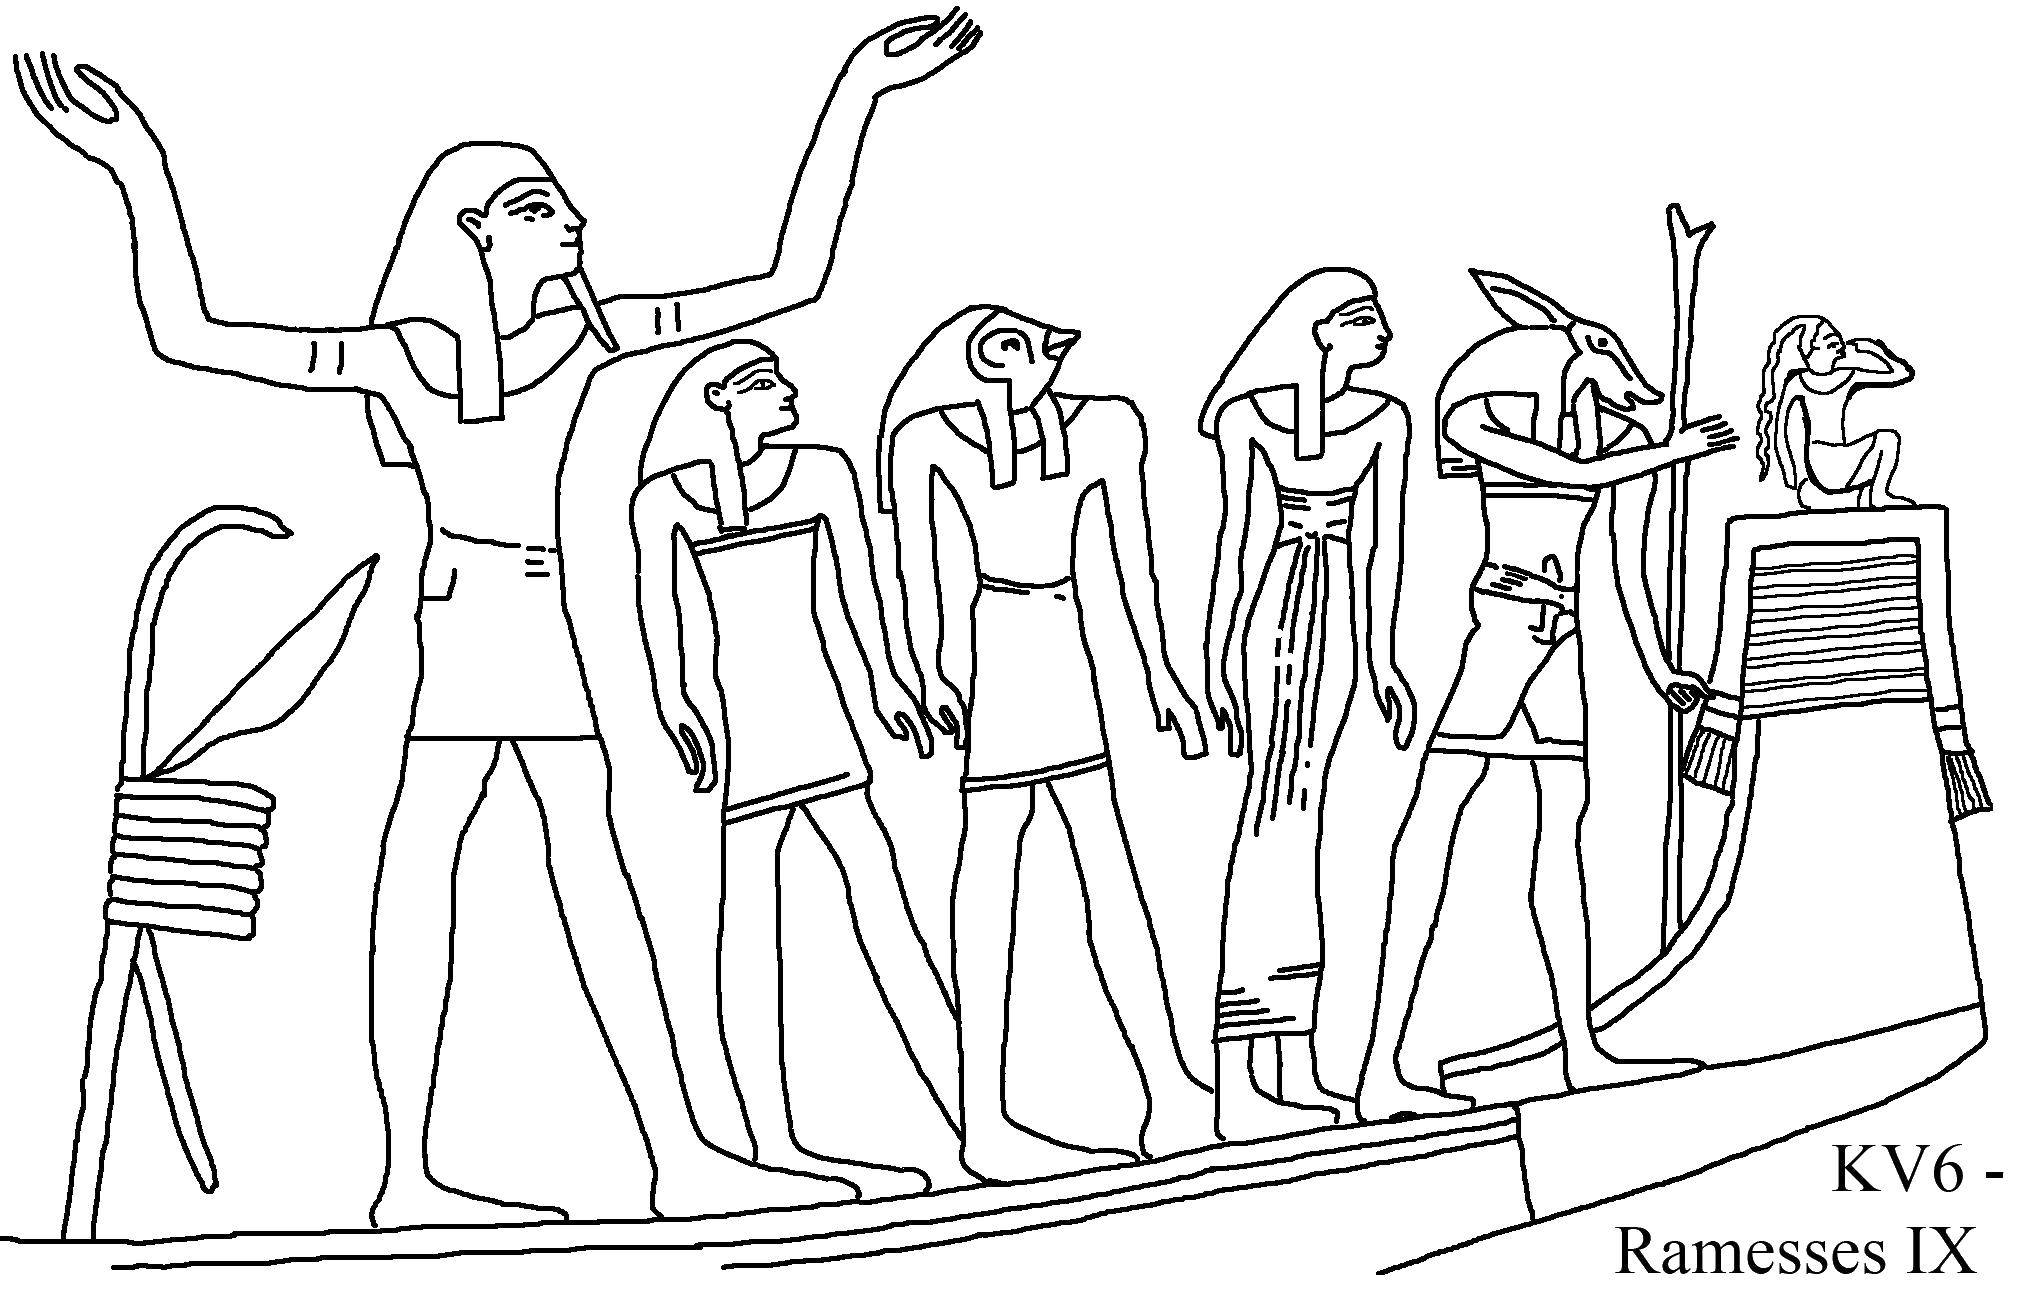 Coloring The ninth Ramses. Category Egypt. Tags:  Egypt.